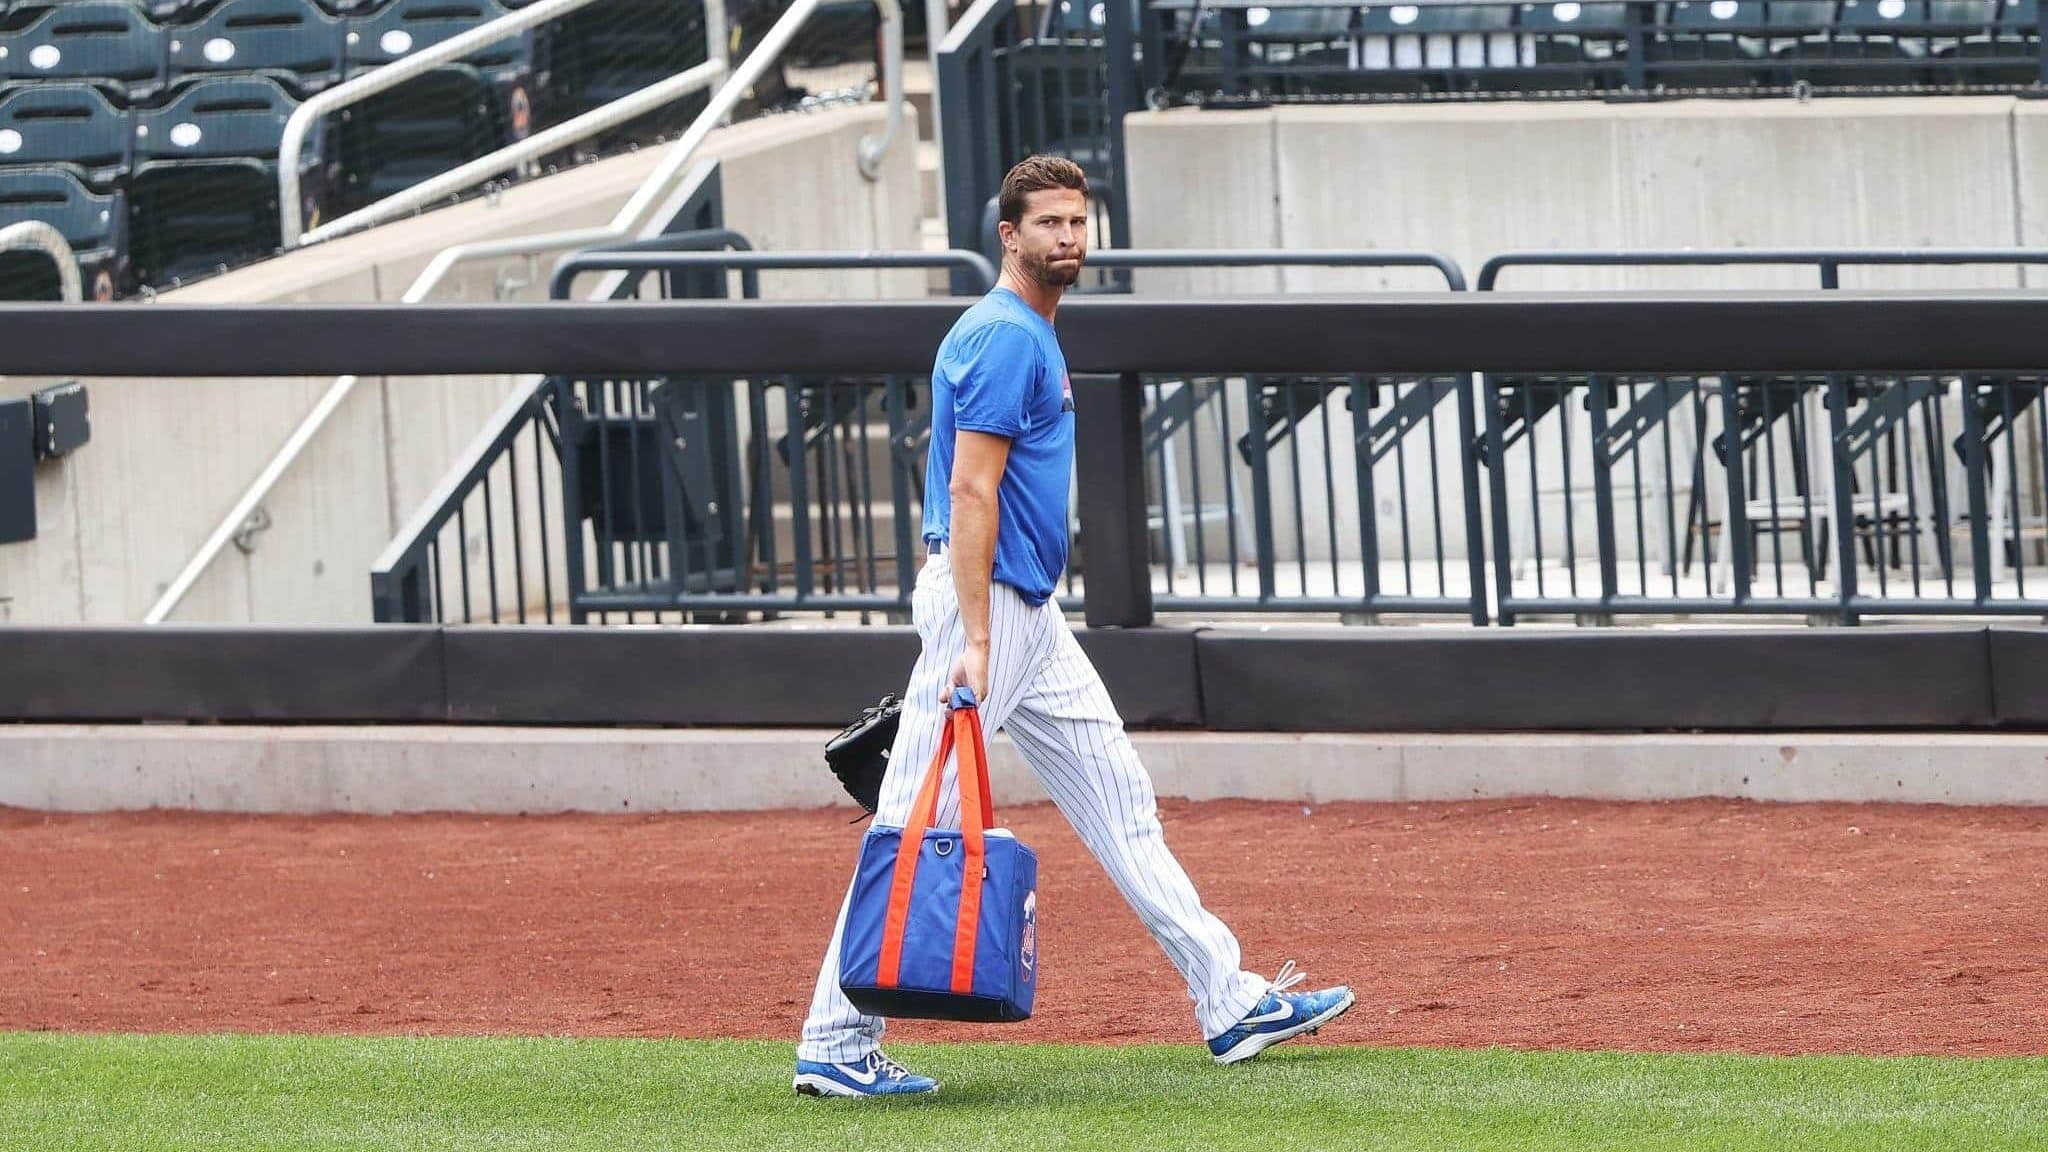 NEW YORK, NEW YORK - JULY 03: Jacob deGrom #48 of the New York Mets walks off the field after his workout during Major League Baseball Summer Training restart at Citi Field on July 03, 2020 in New York City.